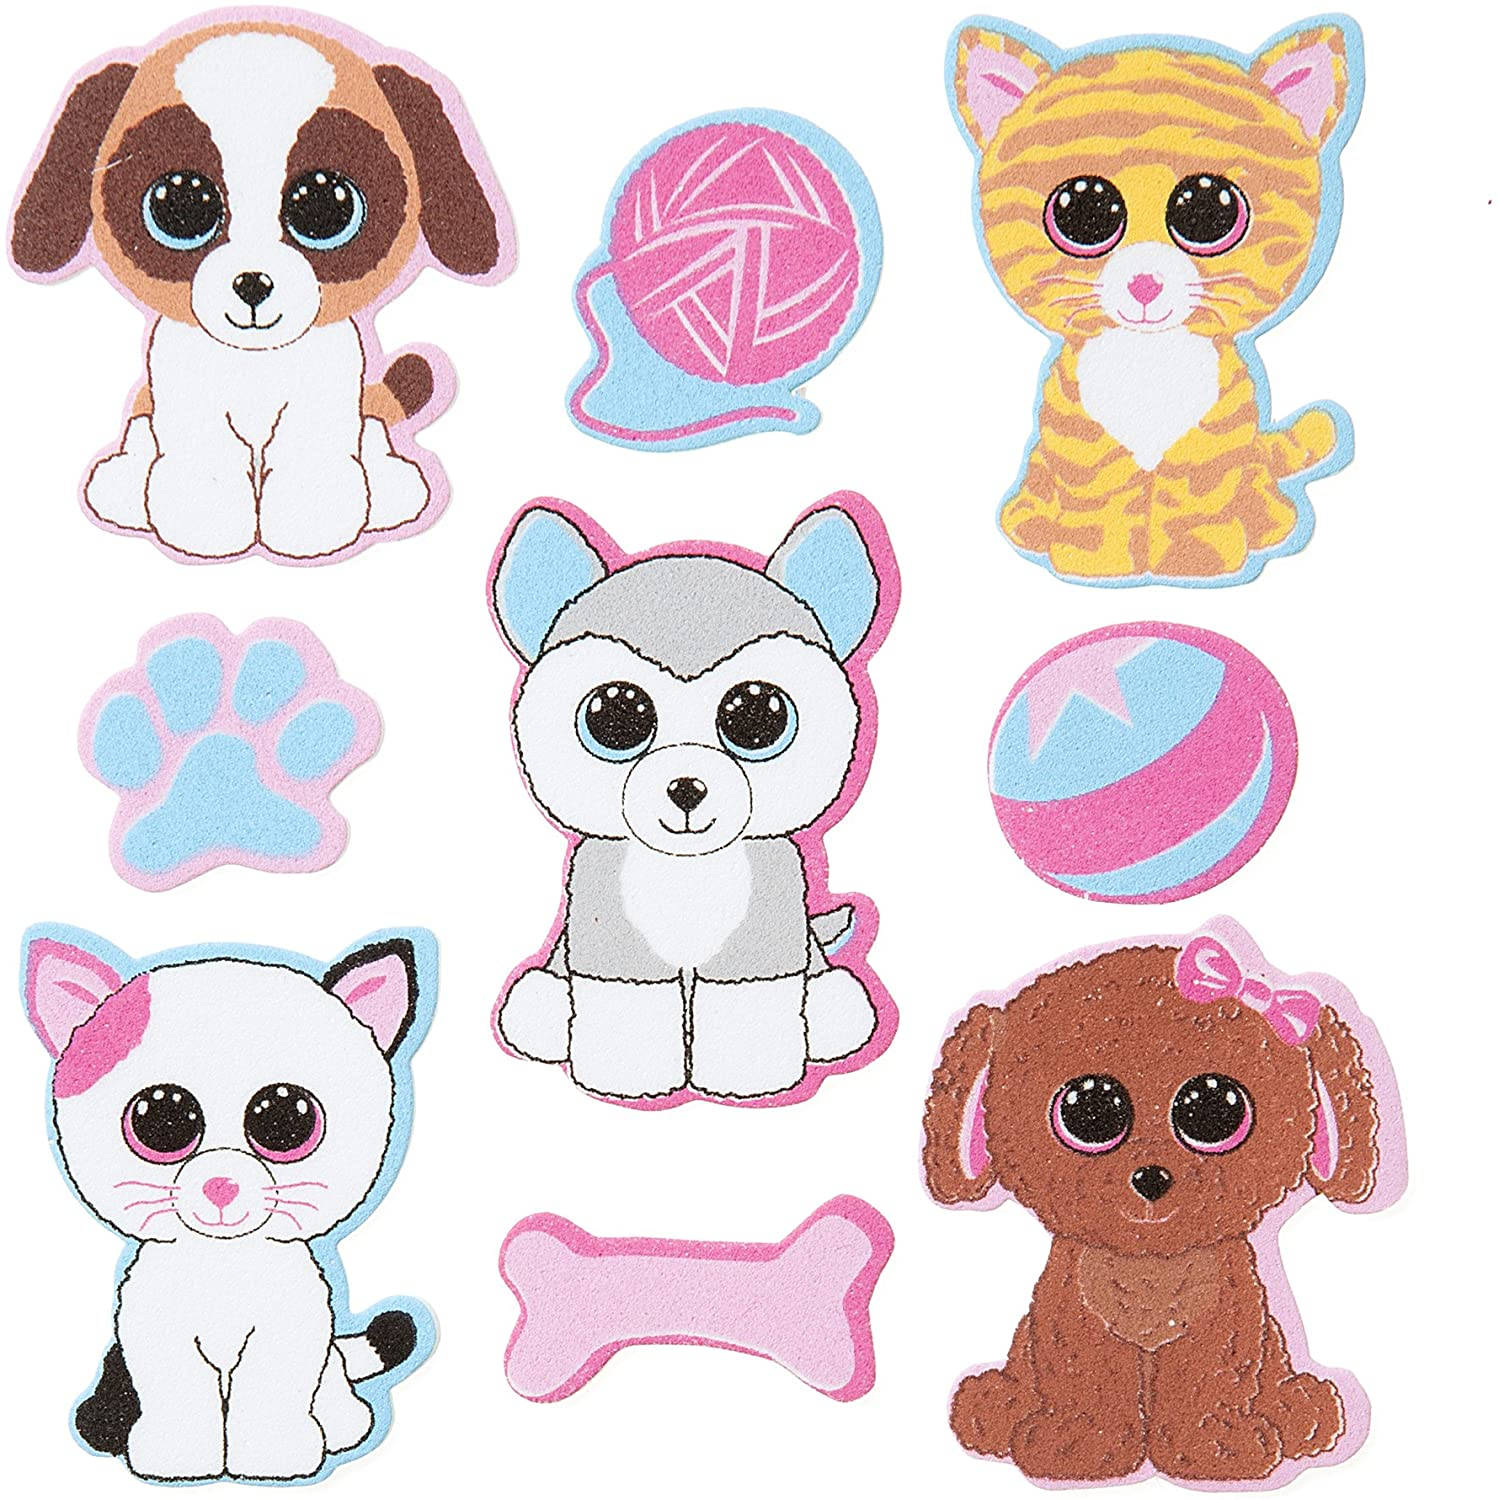 Cat And Dog Beanie Boos